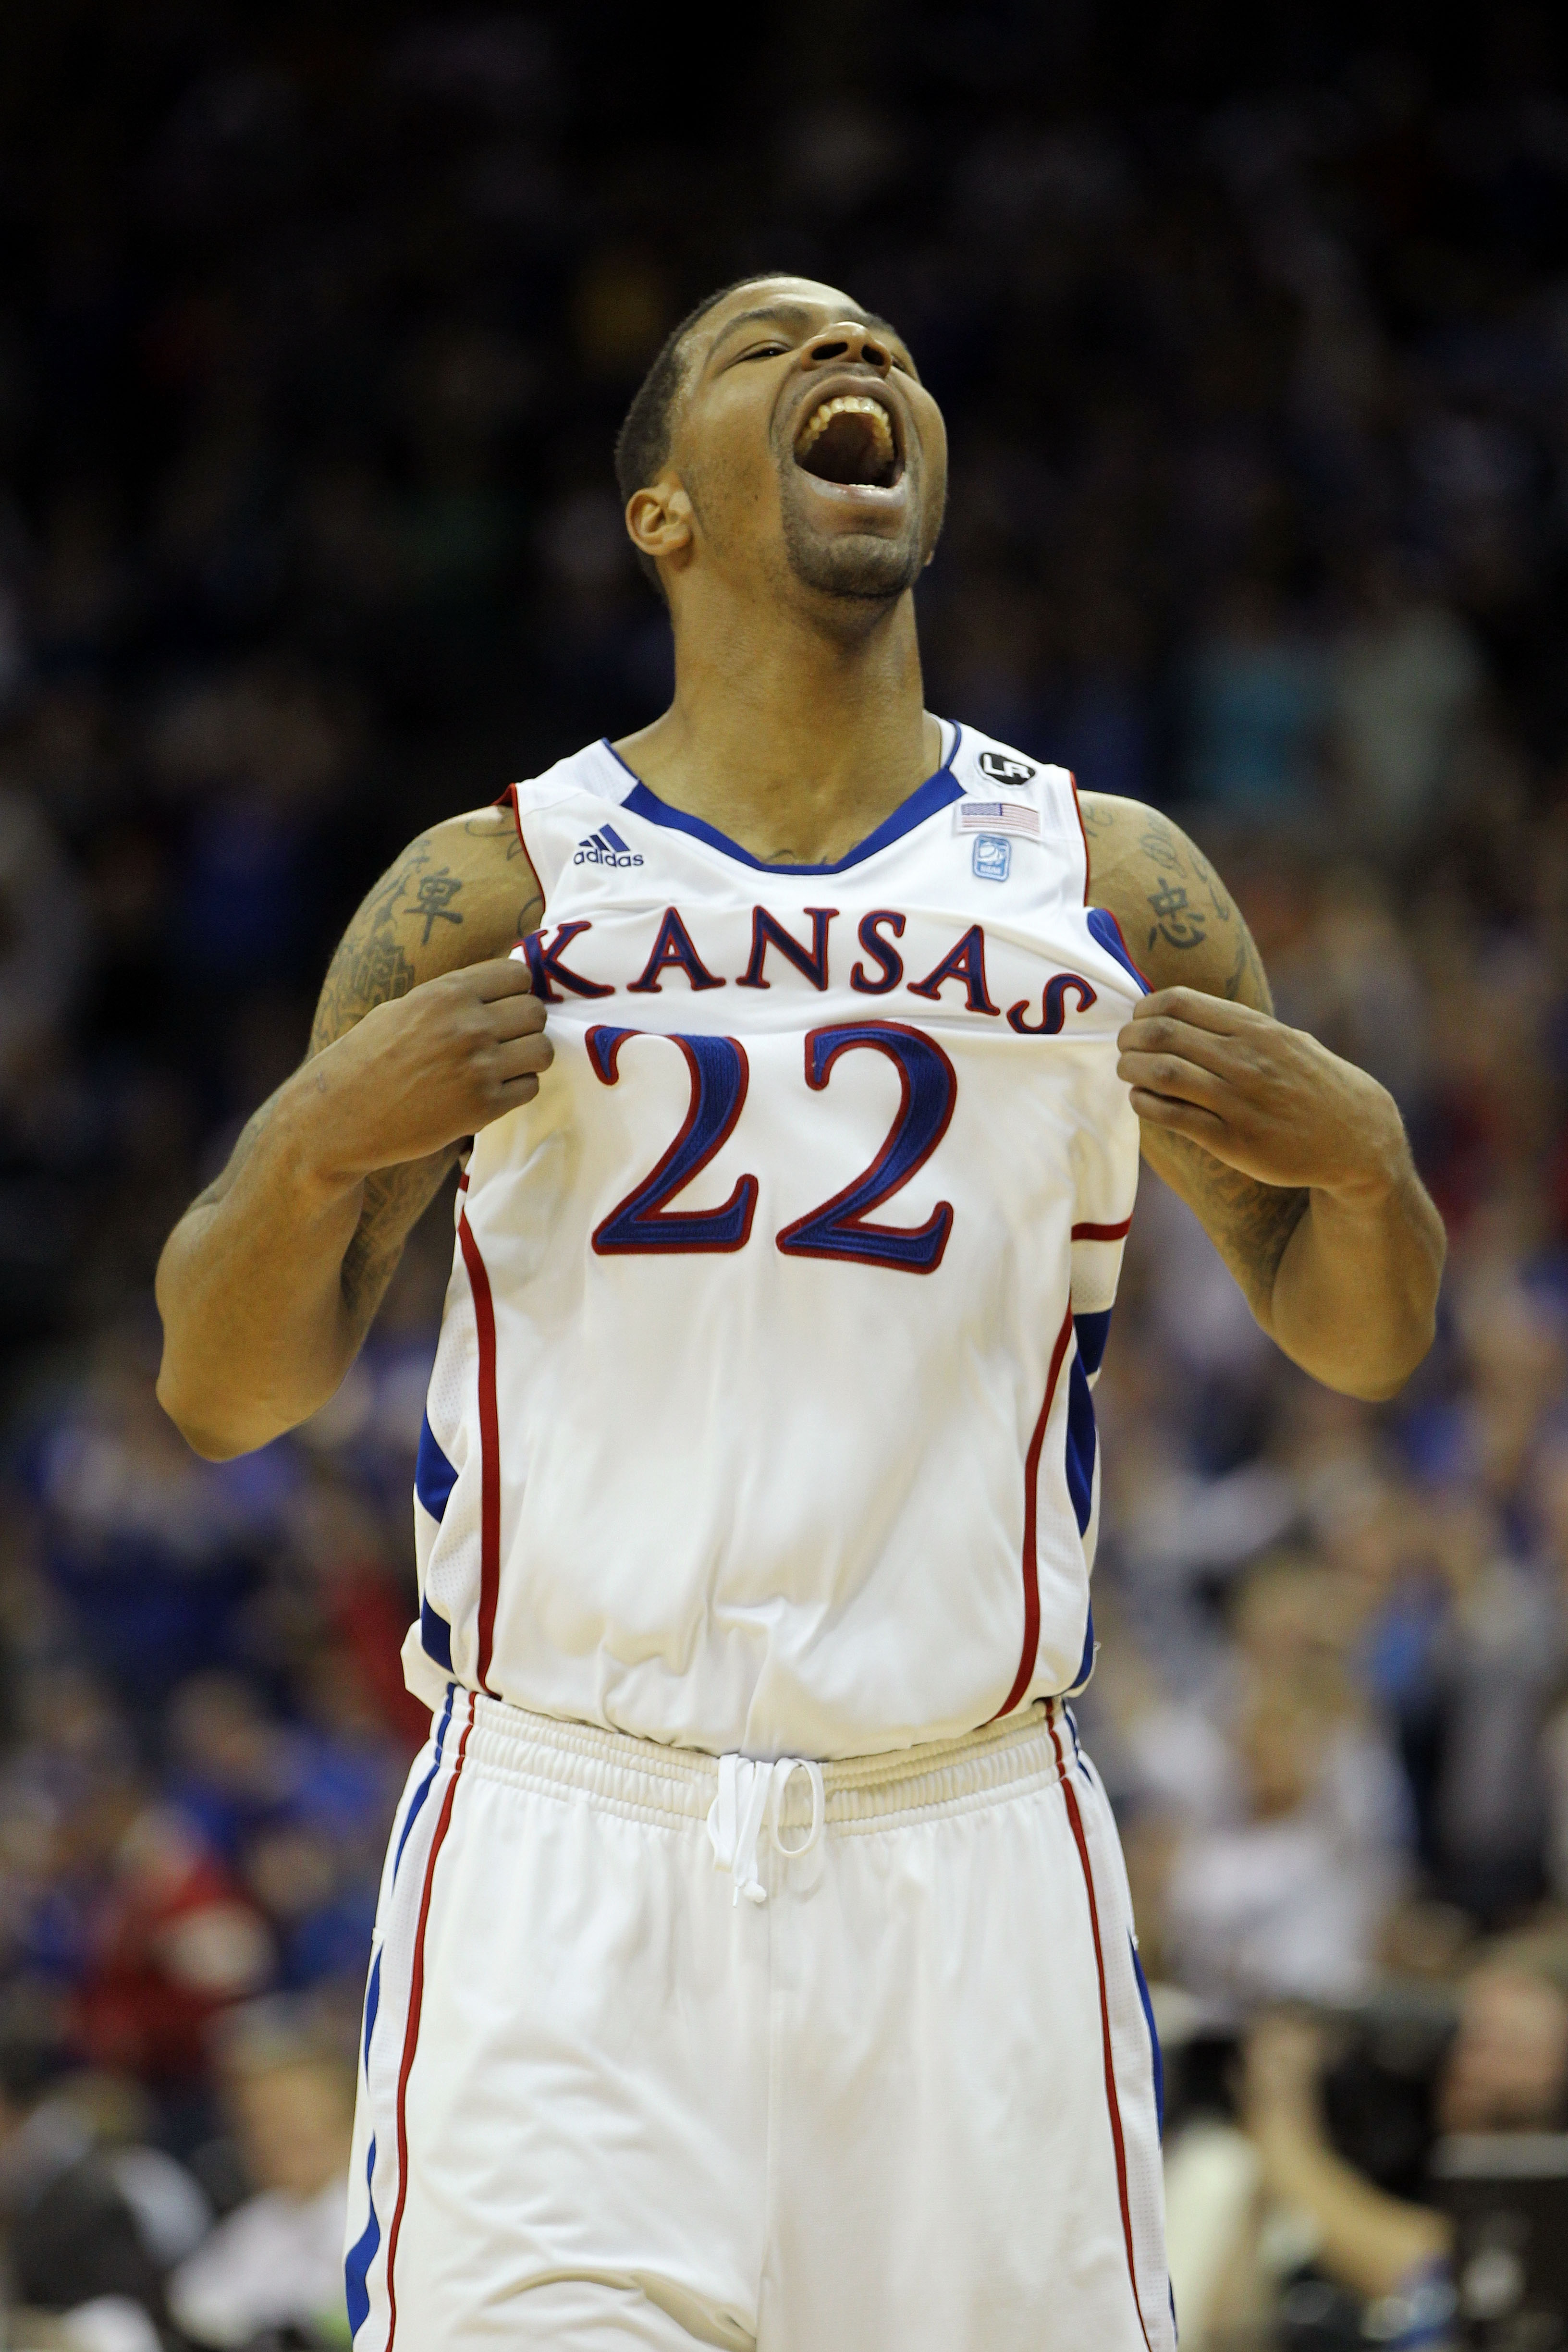 KANSAS CITY, MO - MARCH 12:  Marcus Morris #22 of the Kansas Jayhawks celebrates after a play against the Texas Longhorns during the 2011 Phillips 66 Big 12 Men's Basketball Tournament championship game at Sprint Center on March 12, 2011 in Kansas City, M